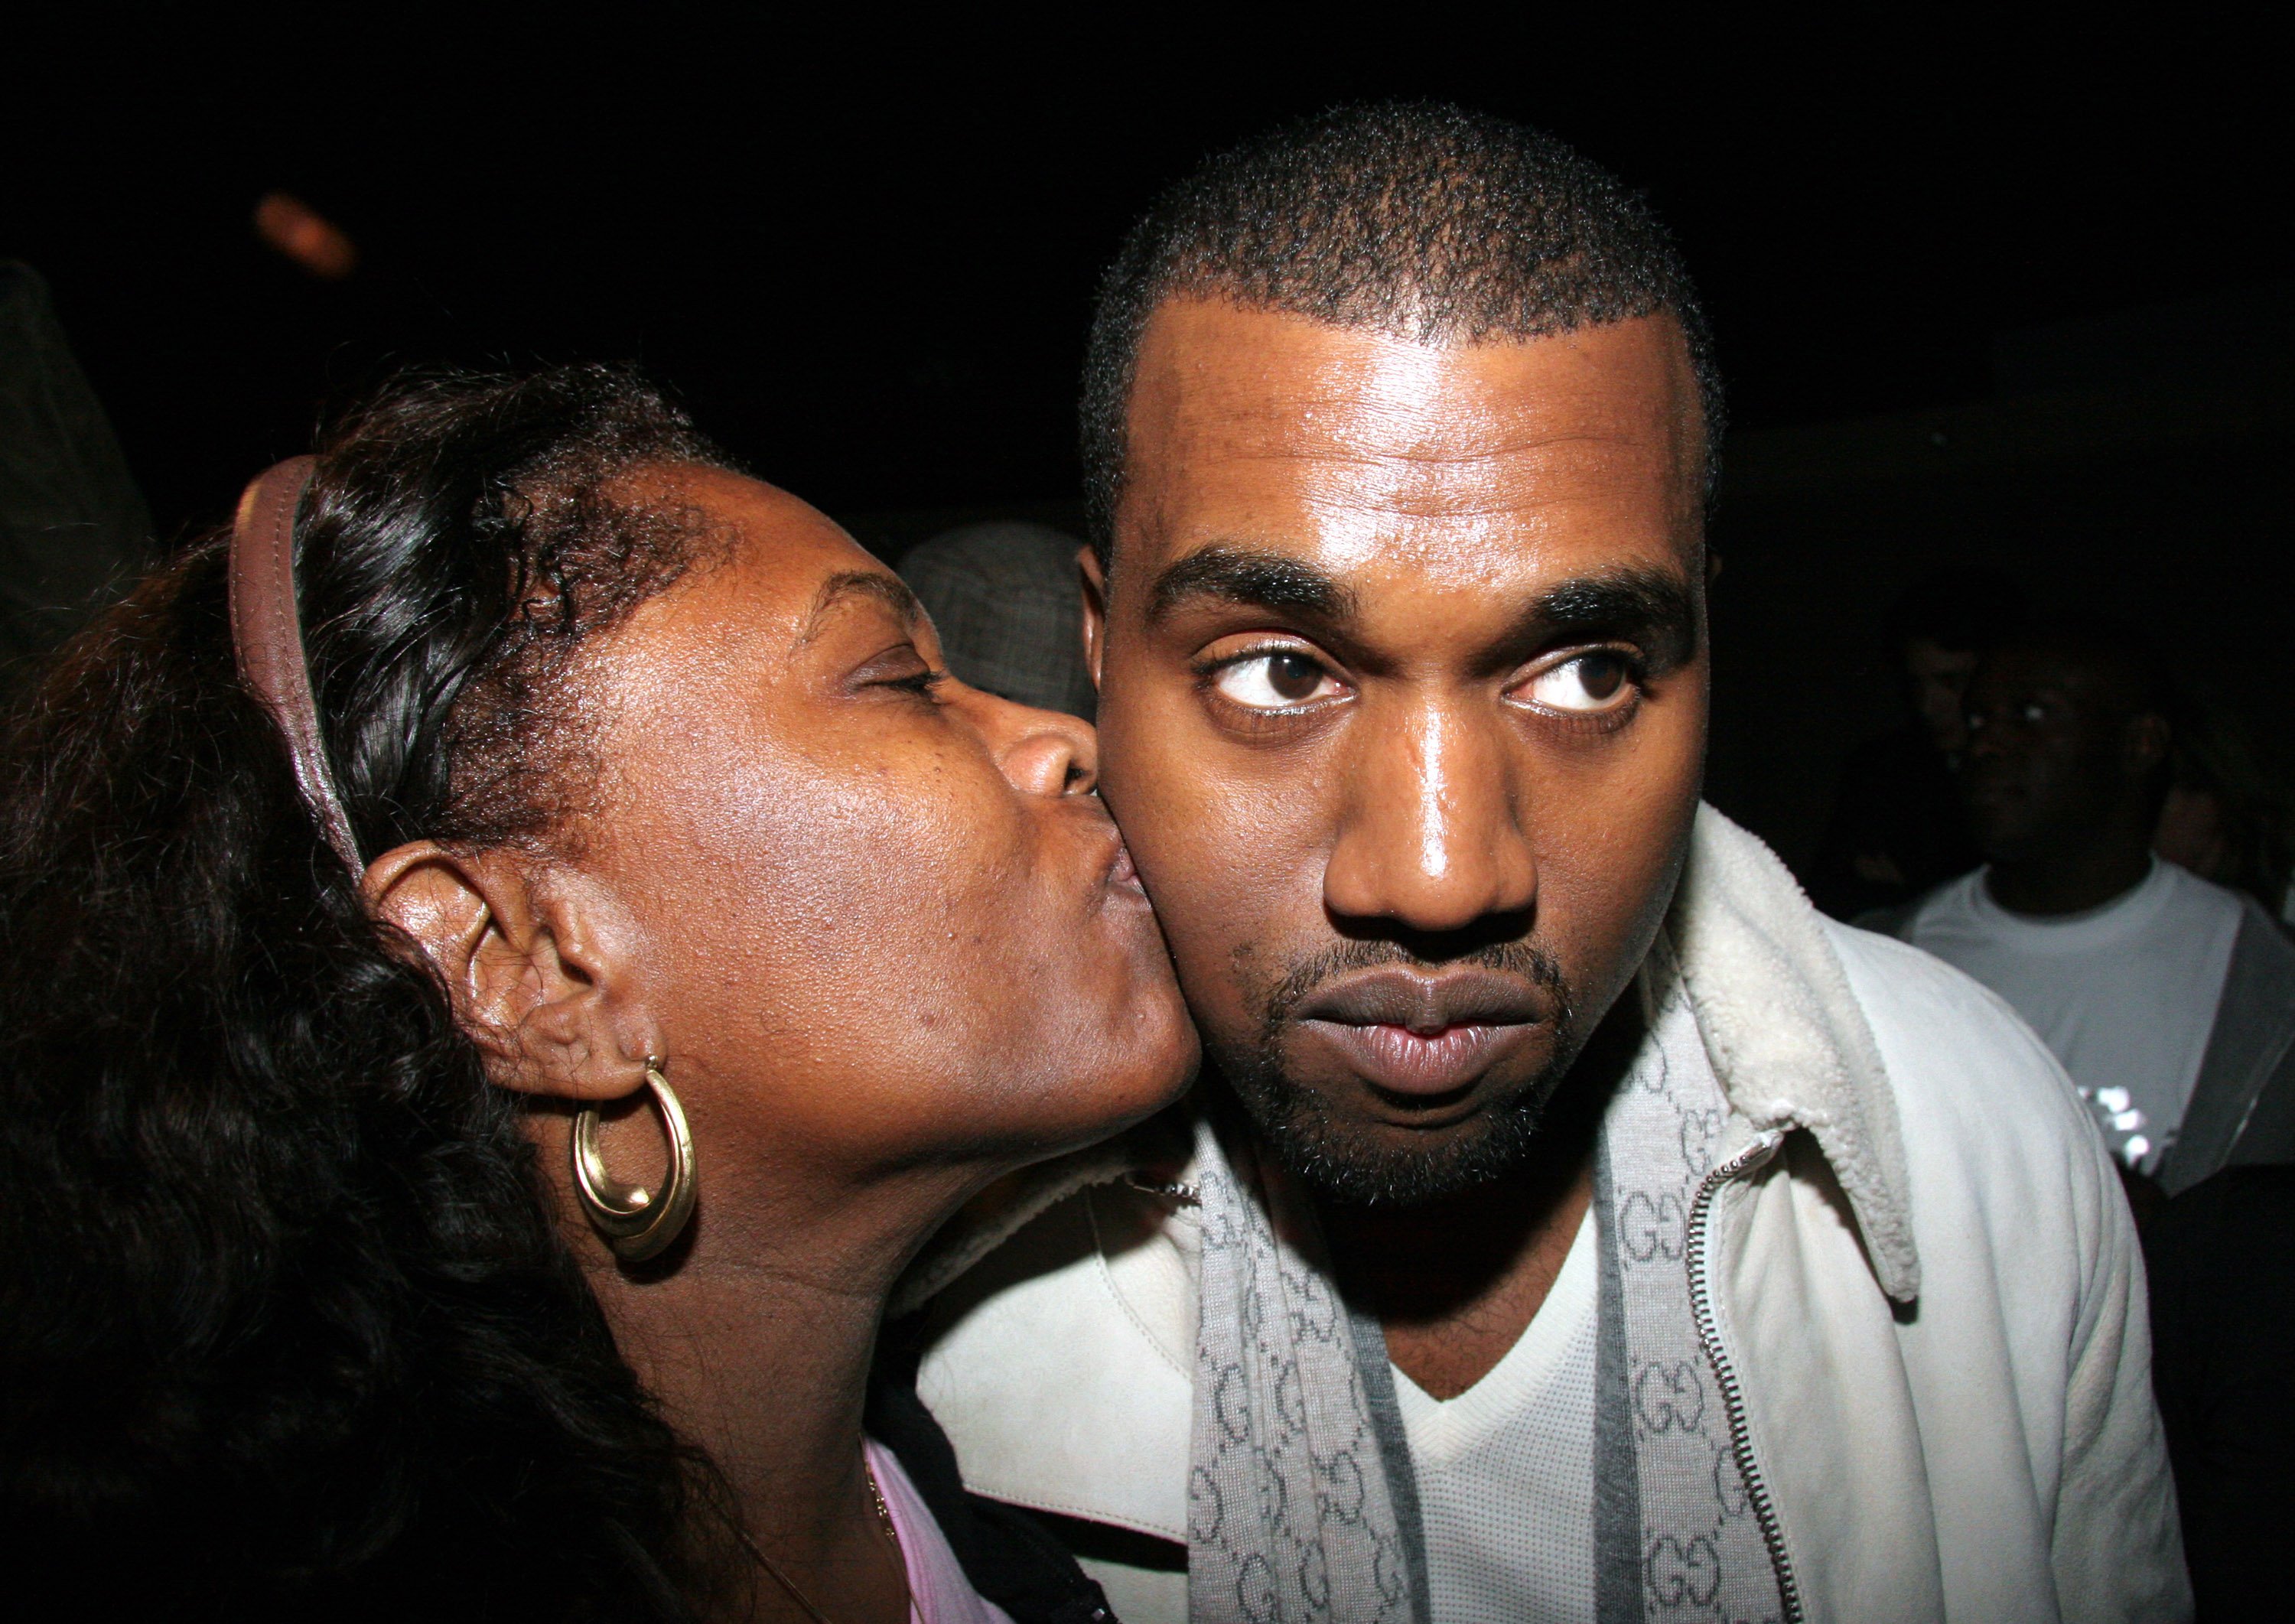 Donda West and Kanye West at the Hennessy Presents Kanye West Platinum Party on November 2, 2005 | Source: Getty Images